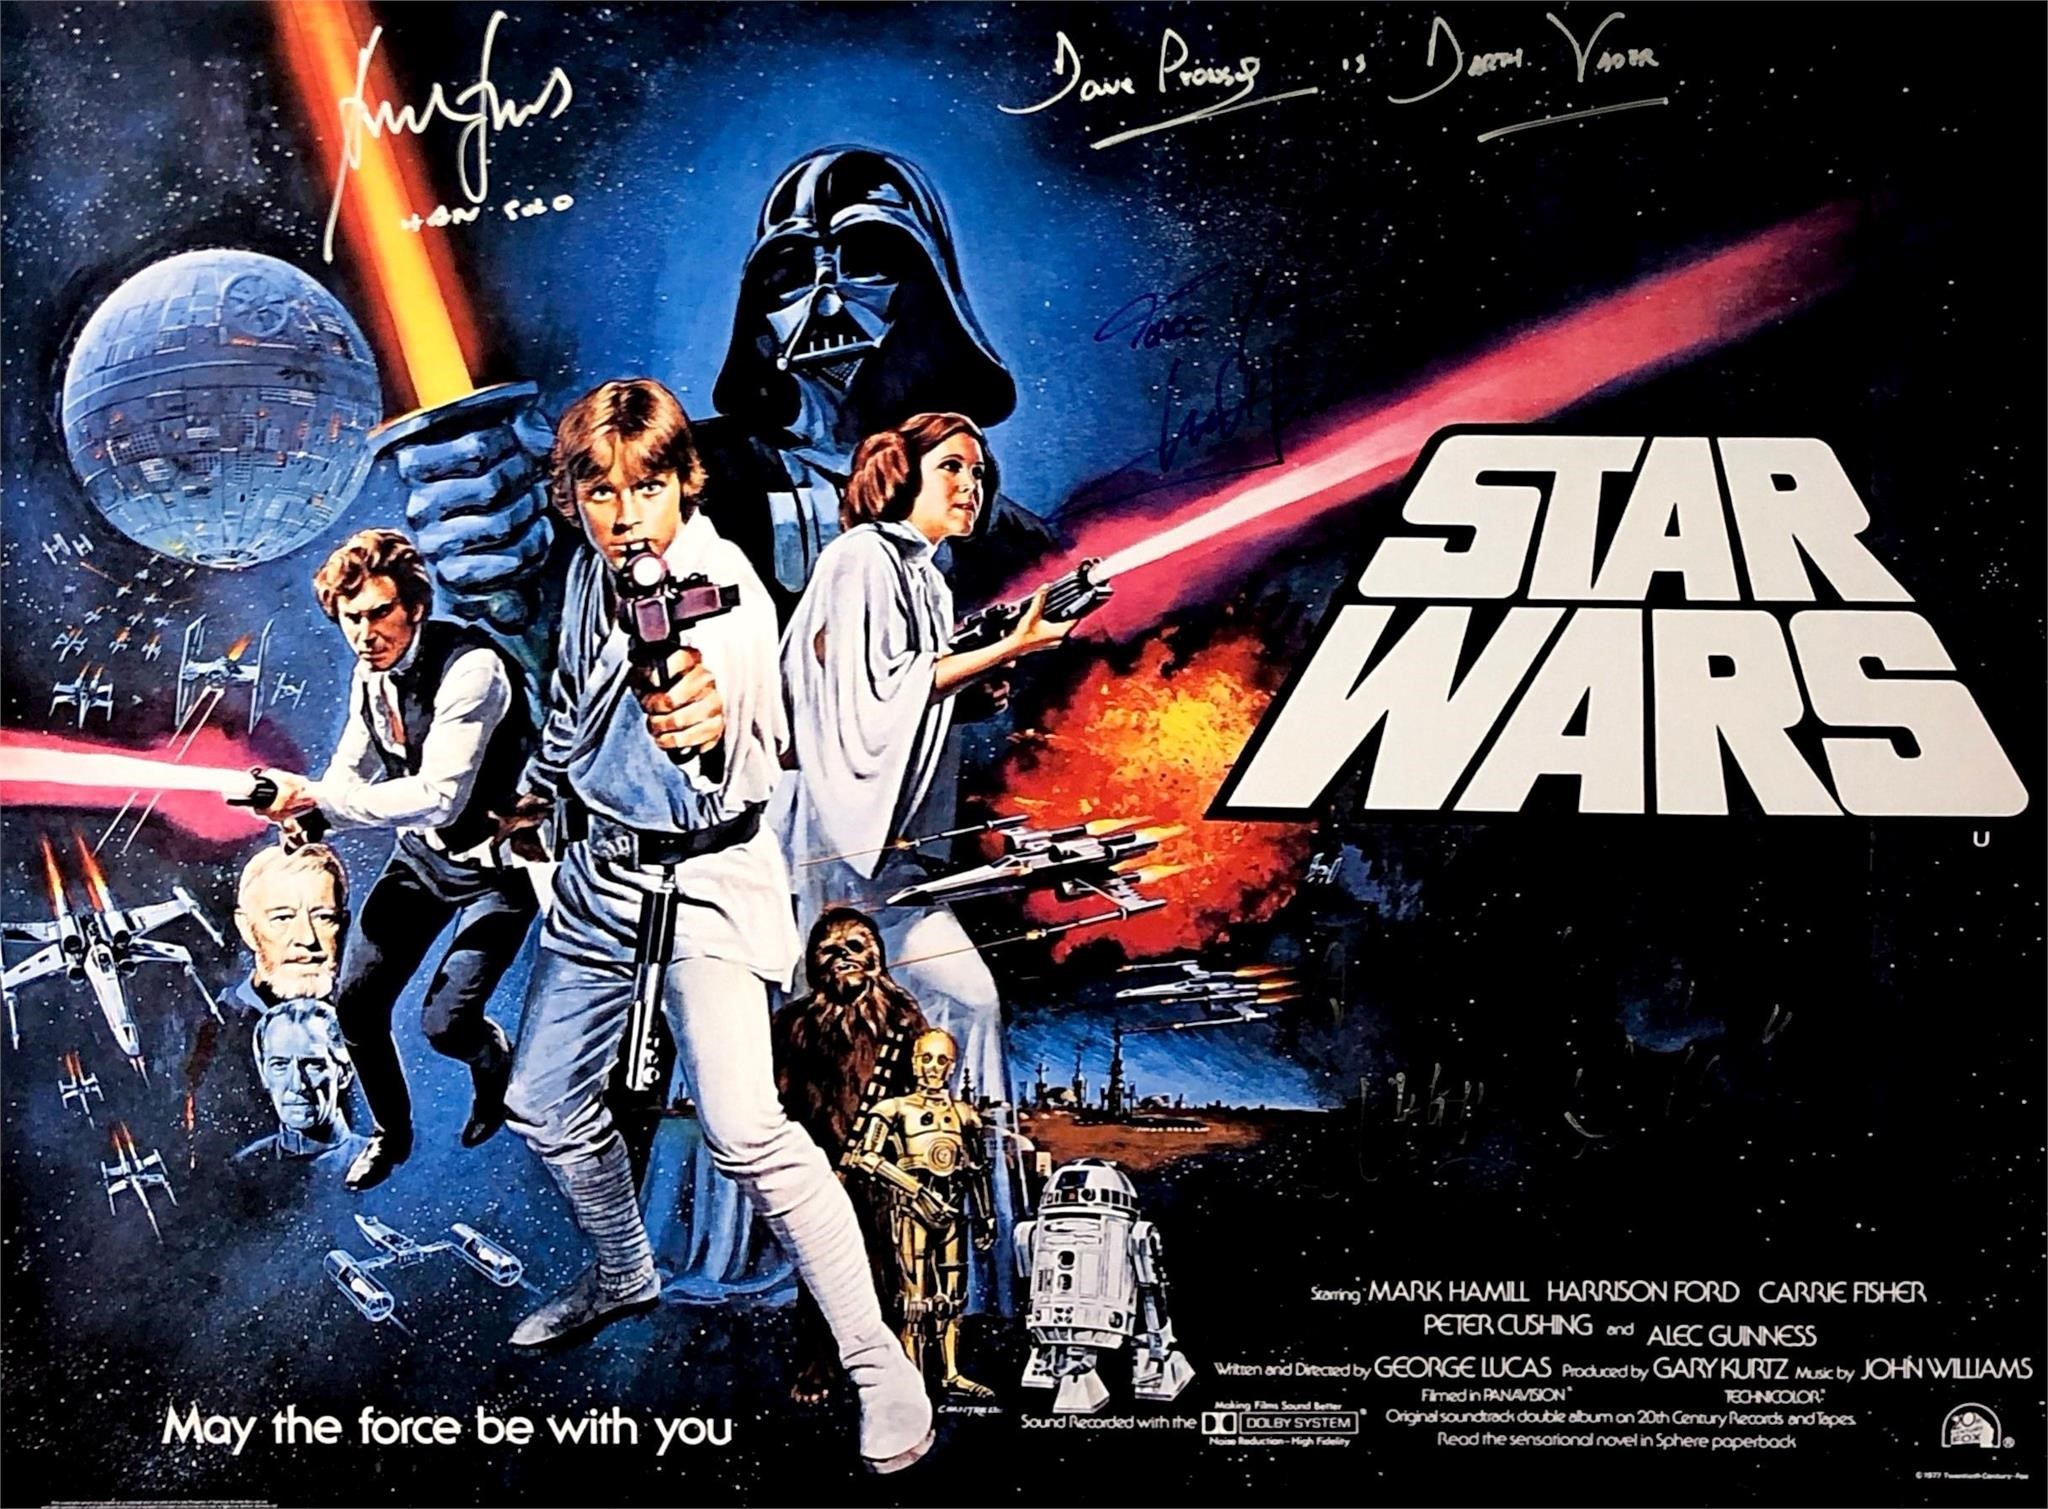 Autograph Star Wars Poster